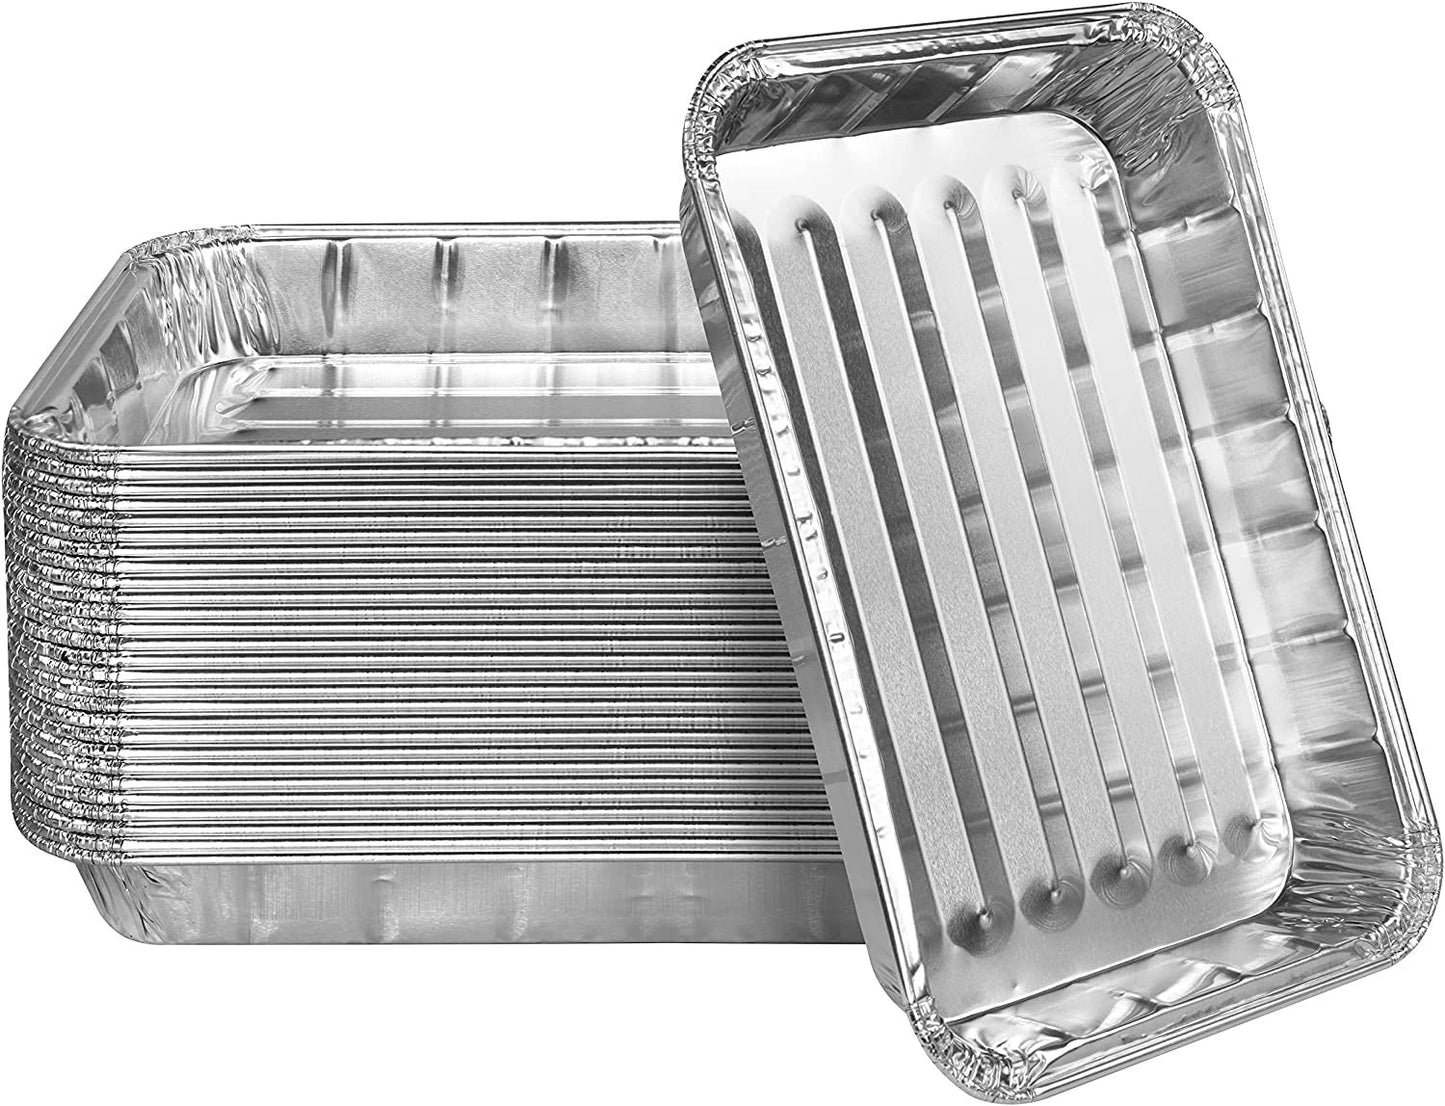 NYHI 9 x 13 Aluminum Foil Pans 30 Pack Durable Disposable Grill Drip Grease  Tray Half-Size Deep Steam Pan and Oven Buffet Trays Food Containers for